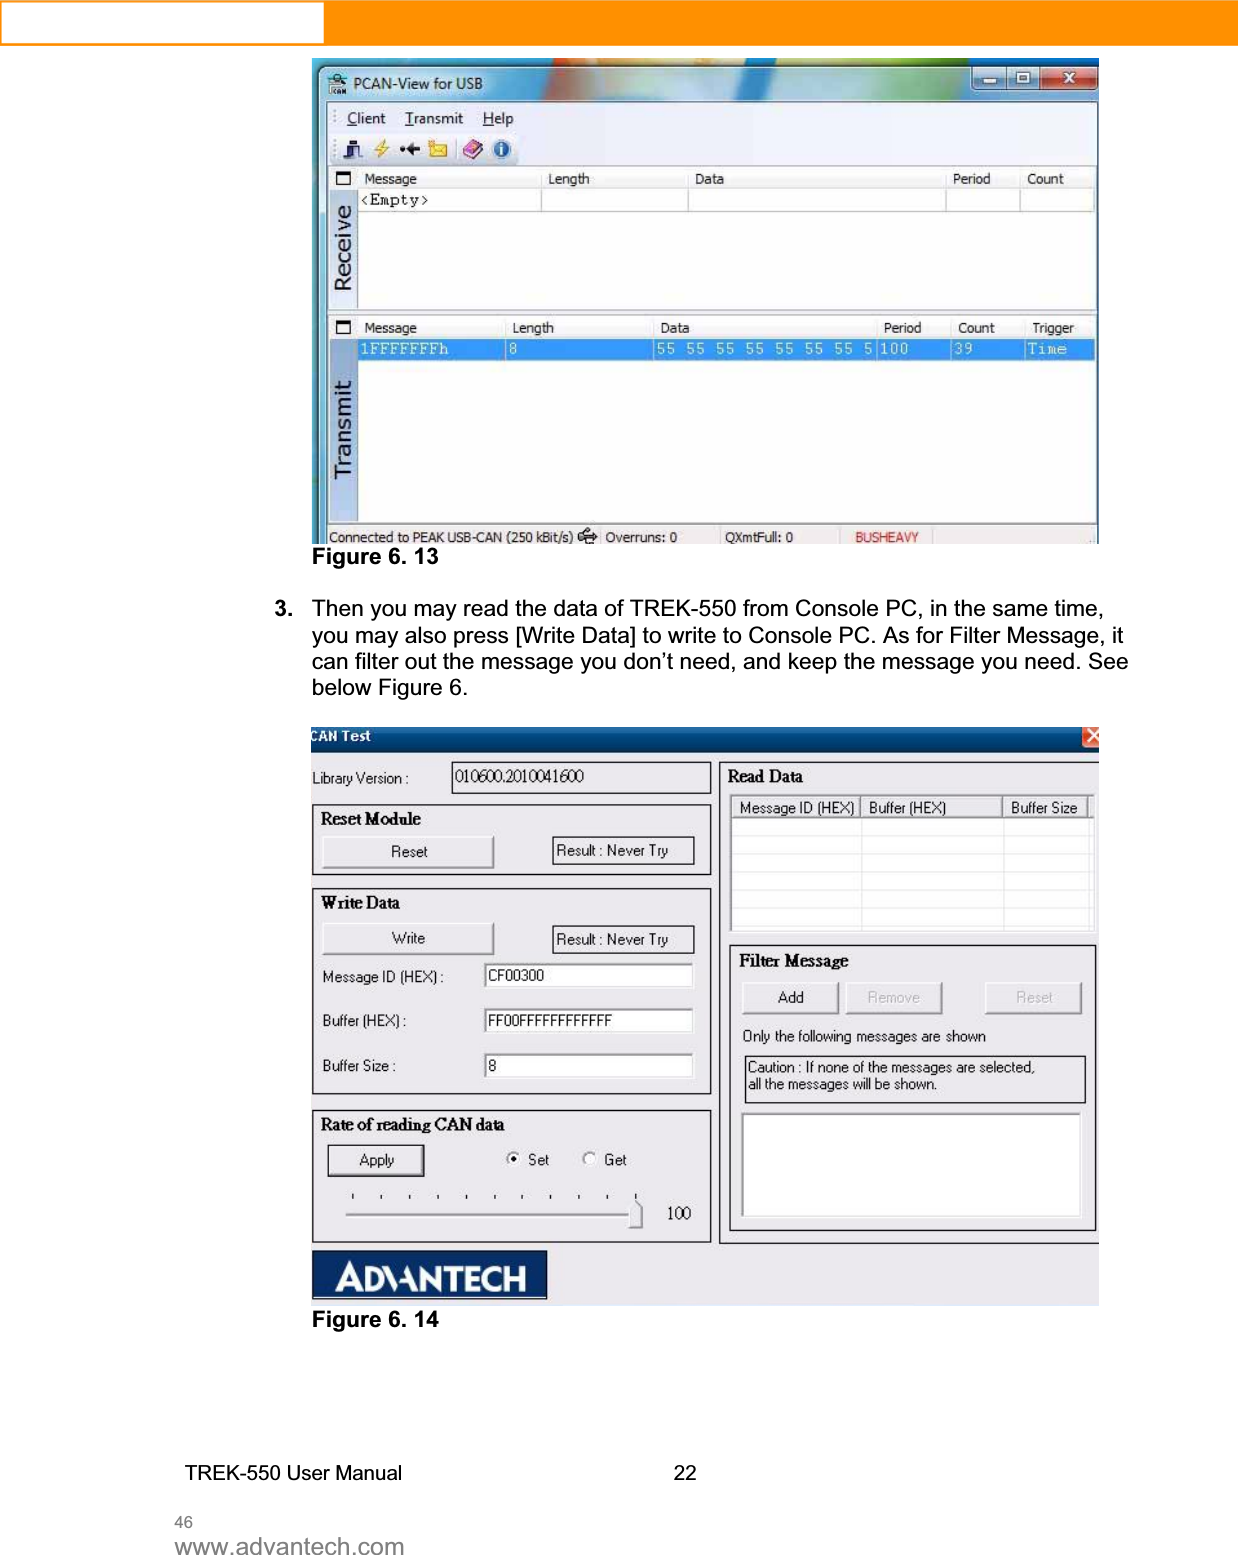 46www.advantech.comFigure 6. 13 3. Then you may read the data of TREK-550 from Console PC, in the same time, you may also press [Write Data] to write to Console PC. As for Filter Message, it can filter out the message you don’t need, and keep the message you need. See below Figure 6.   Figure 6. 14 TREK-550 User Manual22